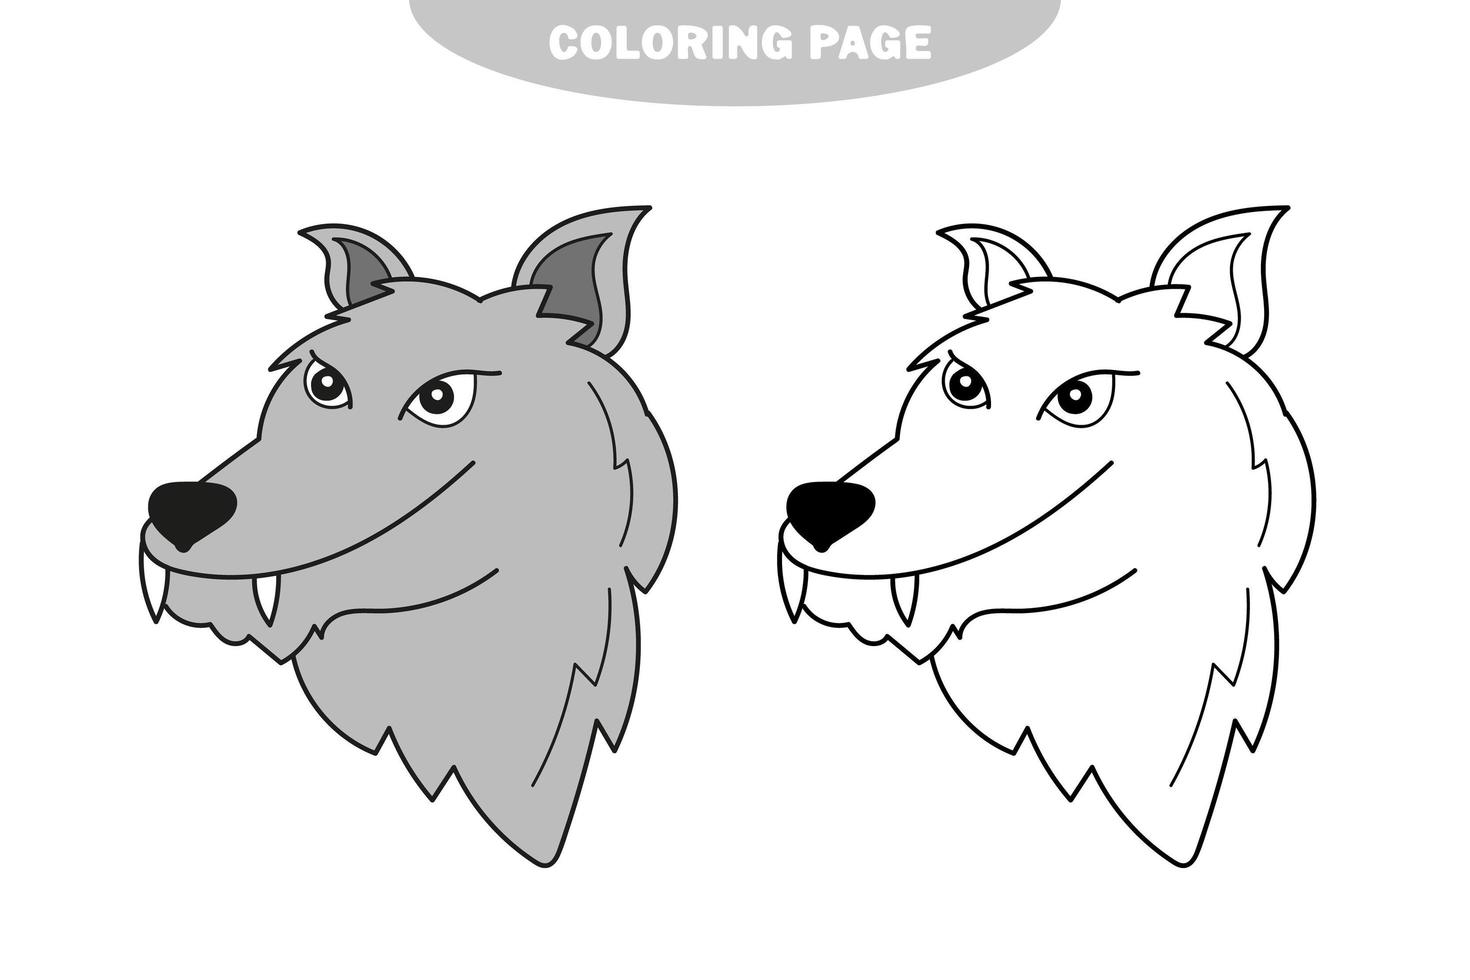 Simple coloring page. Wolf Head to be colored, coloring book for preschool kids vector